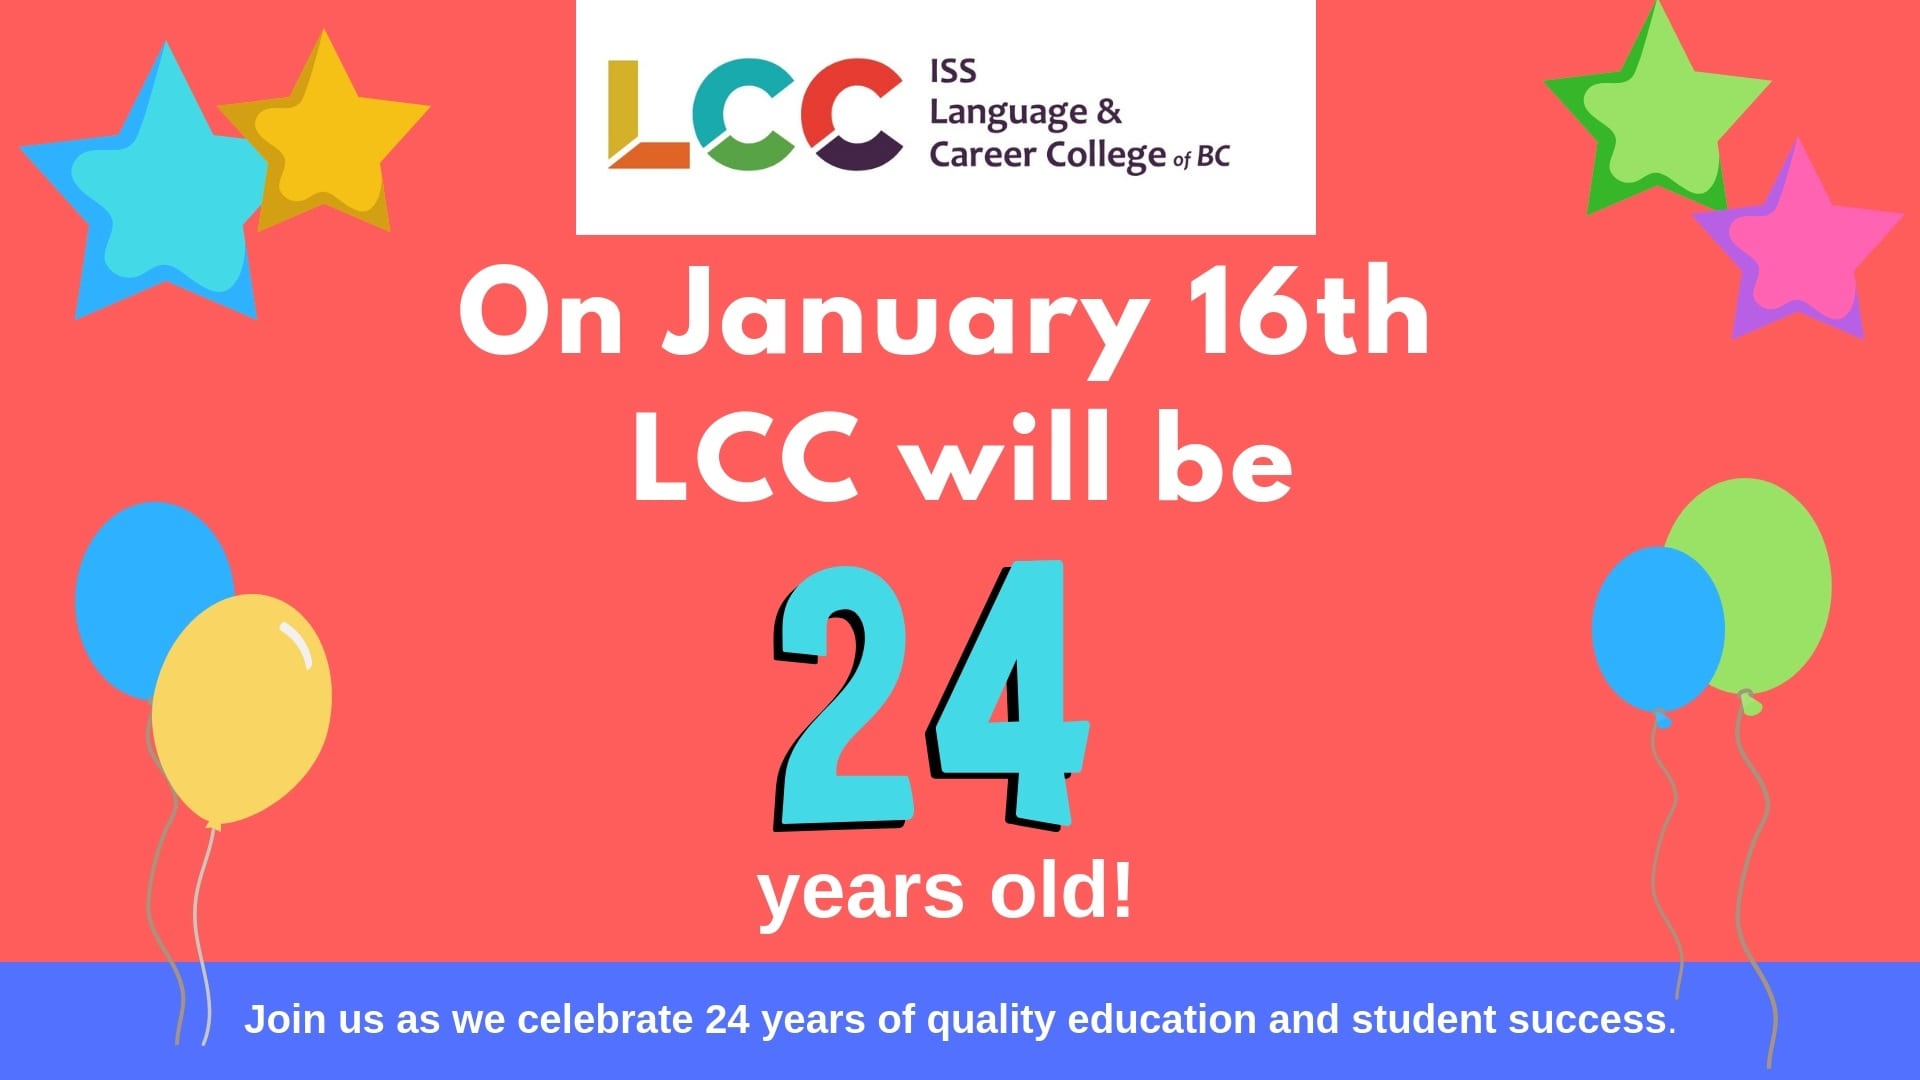 LCC is turning 24!